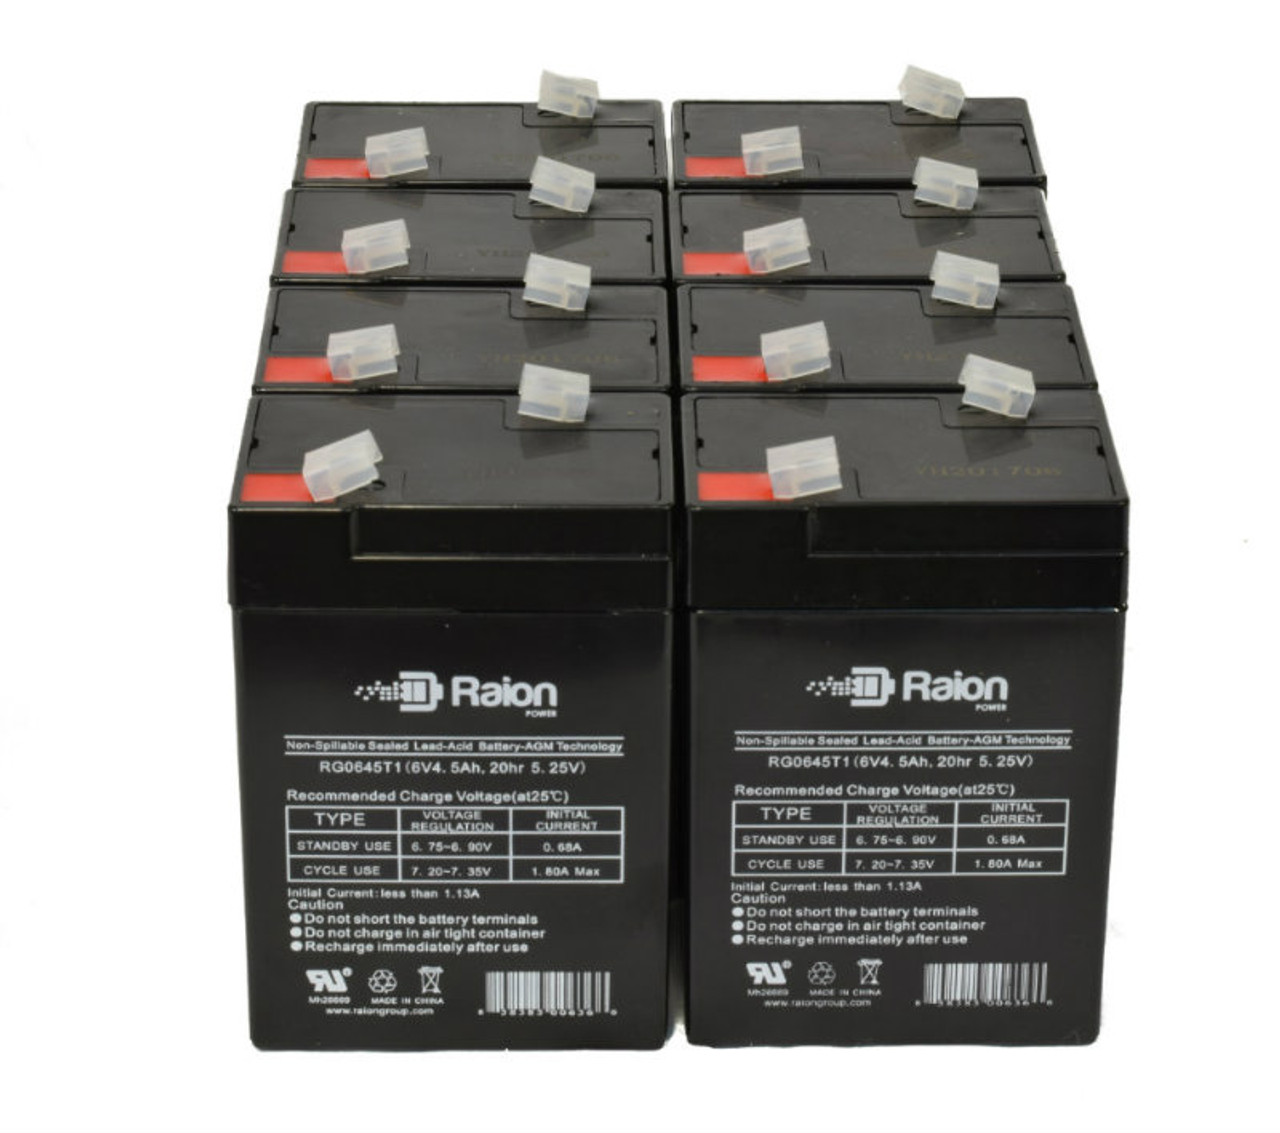 Raion Power RG0645T1 6V 4.5Ah Replacement Medical Equipment Battery for Alaris Medical 4415 Vital Check Monitor - 8 Pack